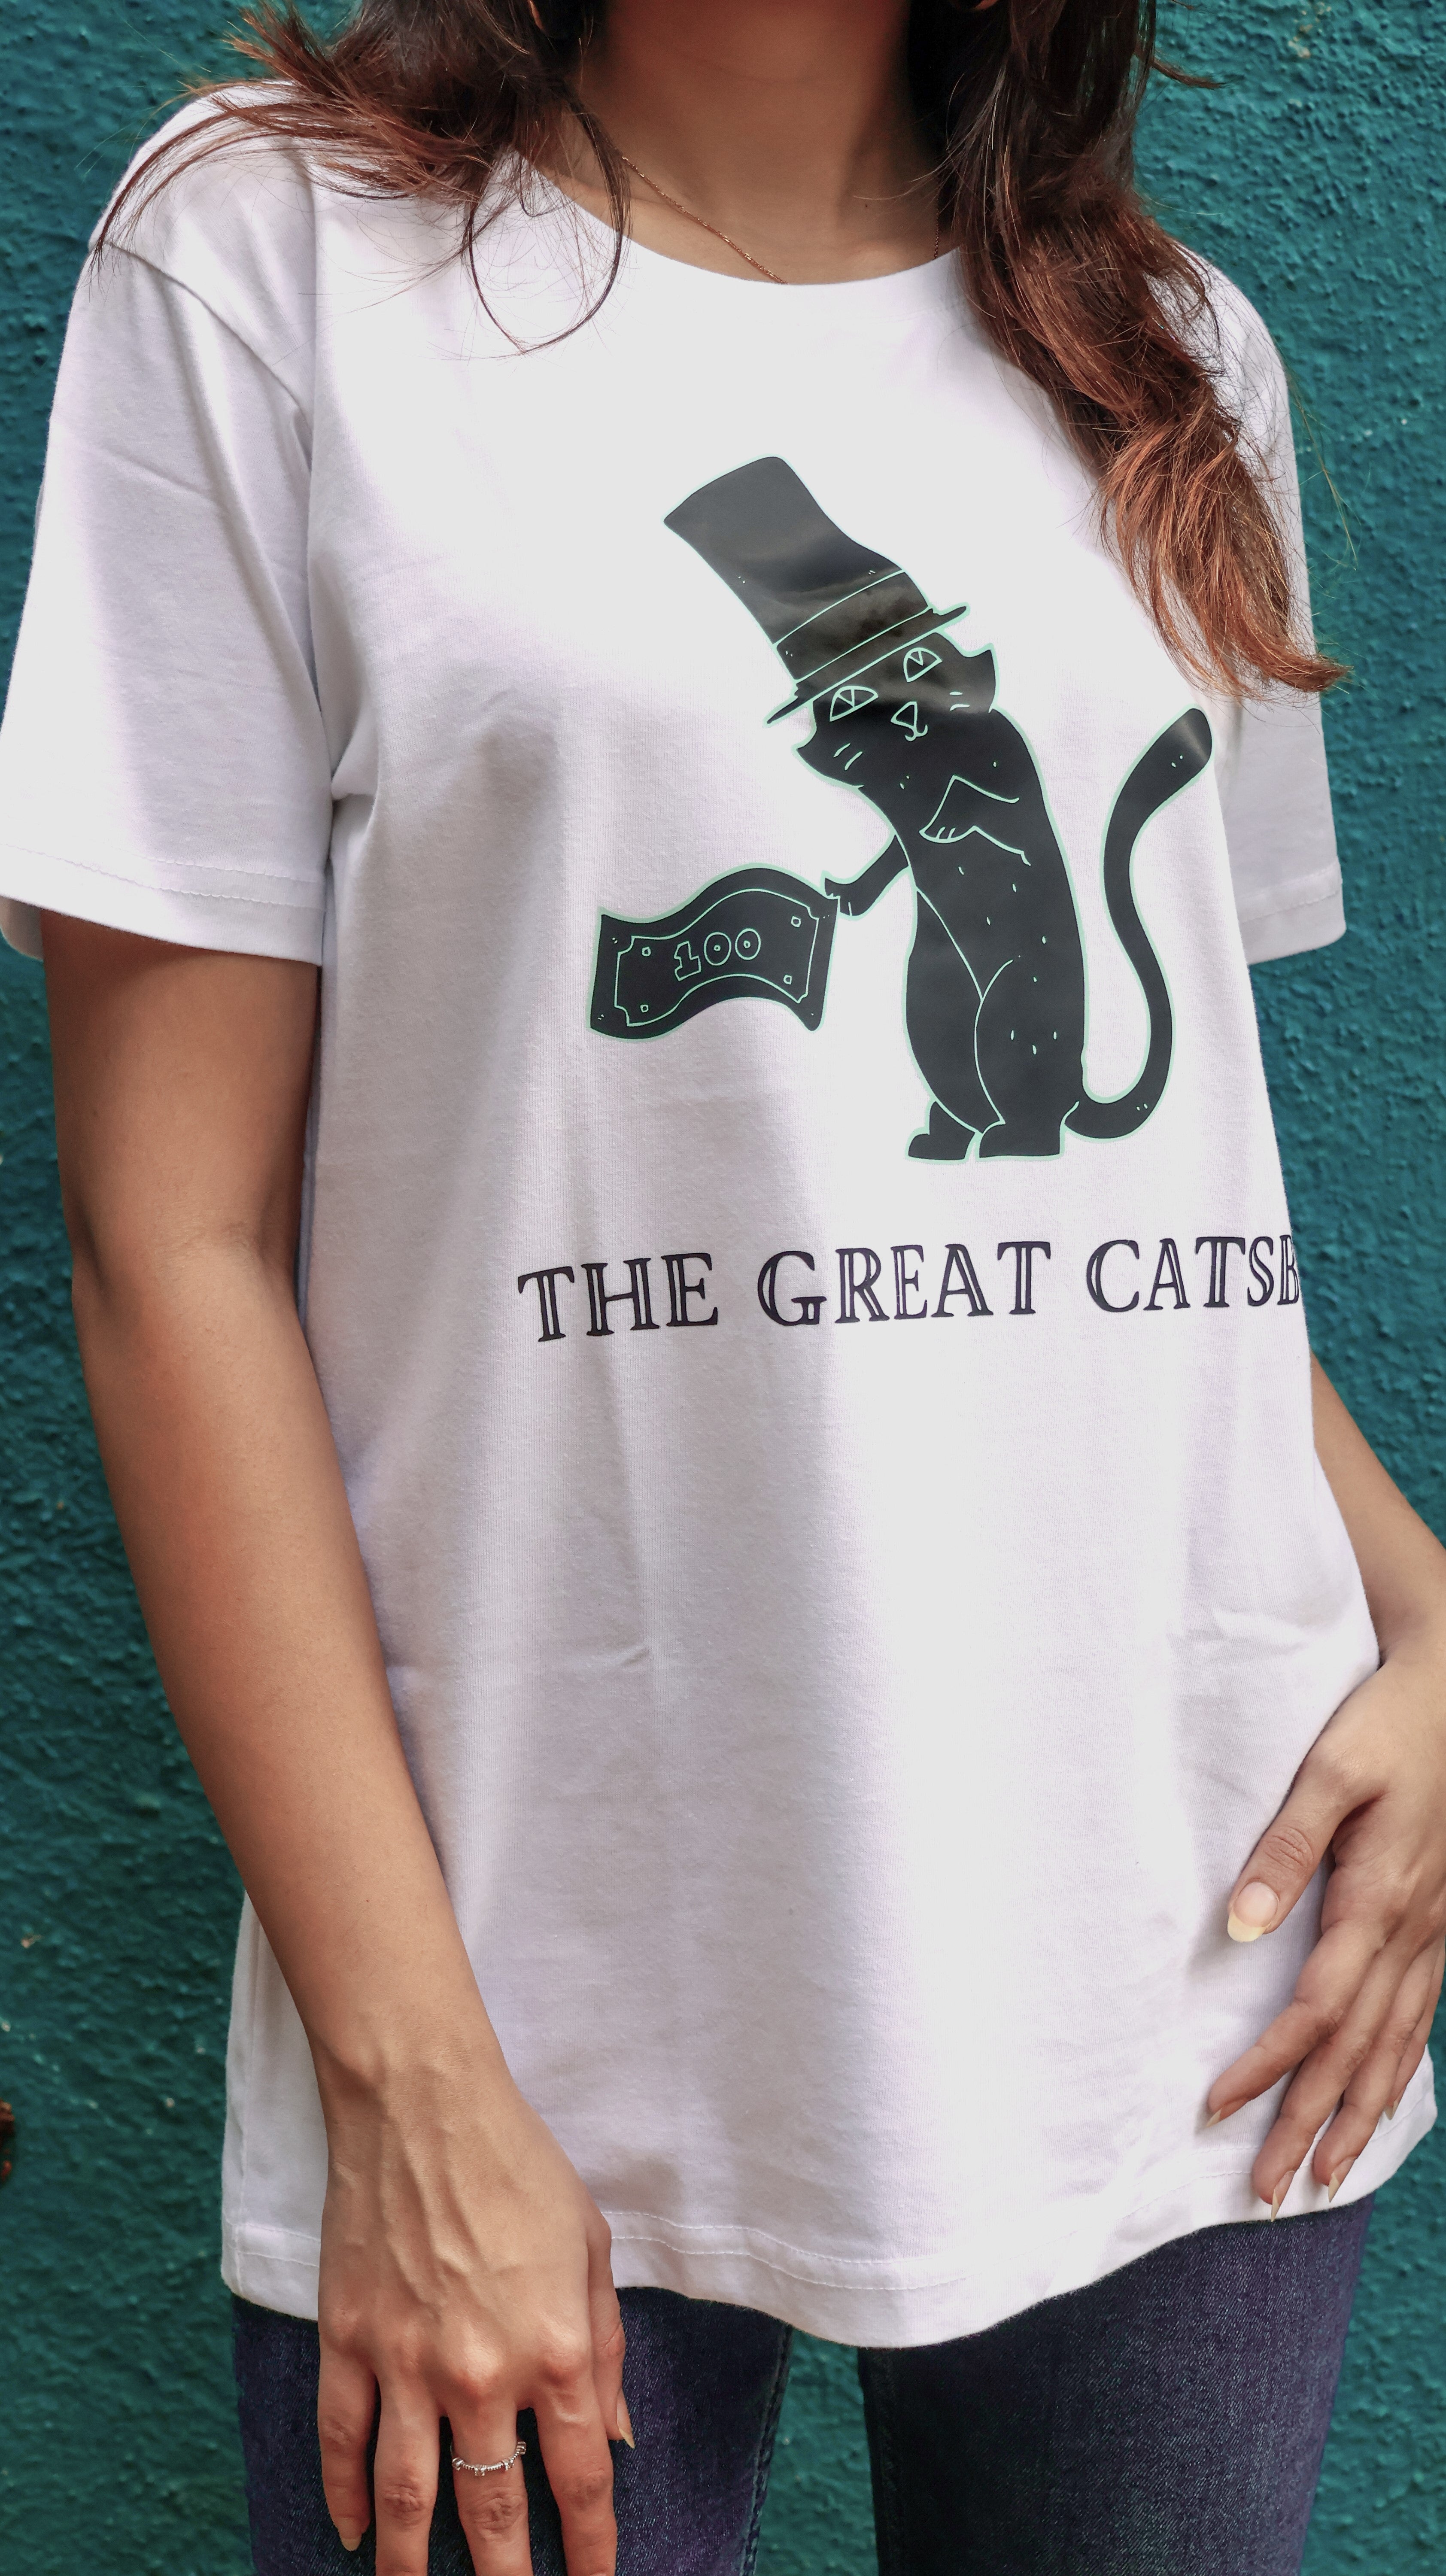 The Great Catsby T-Shirt- UNISEX